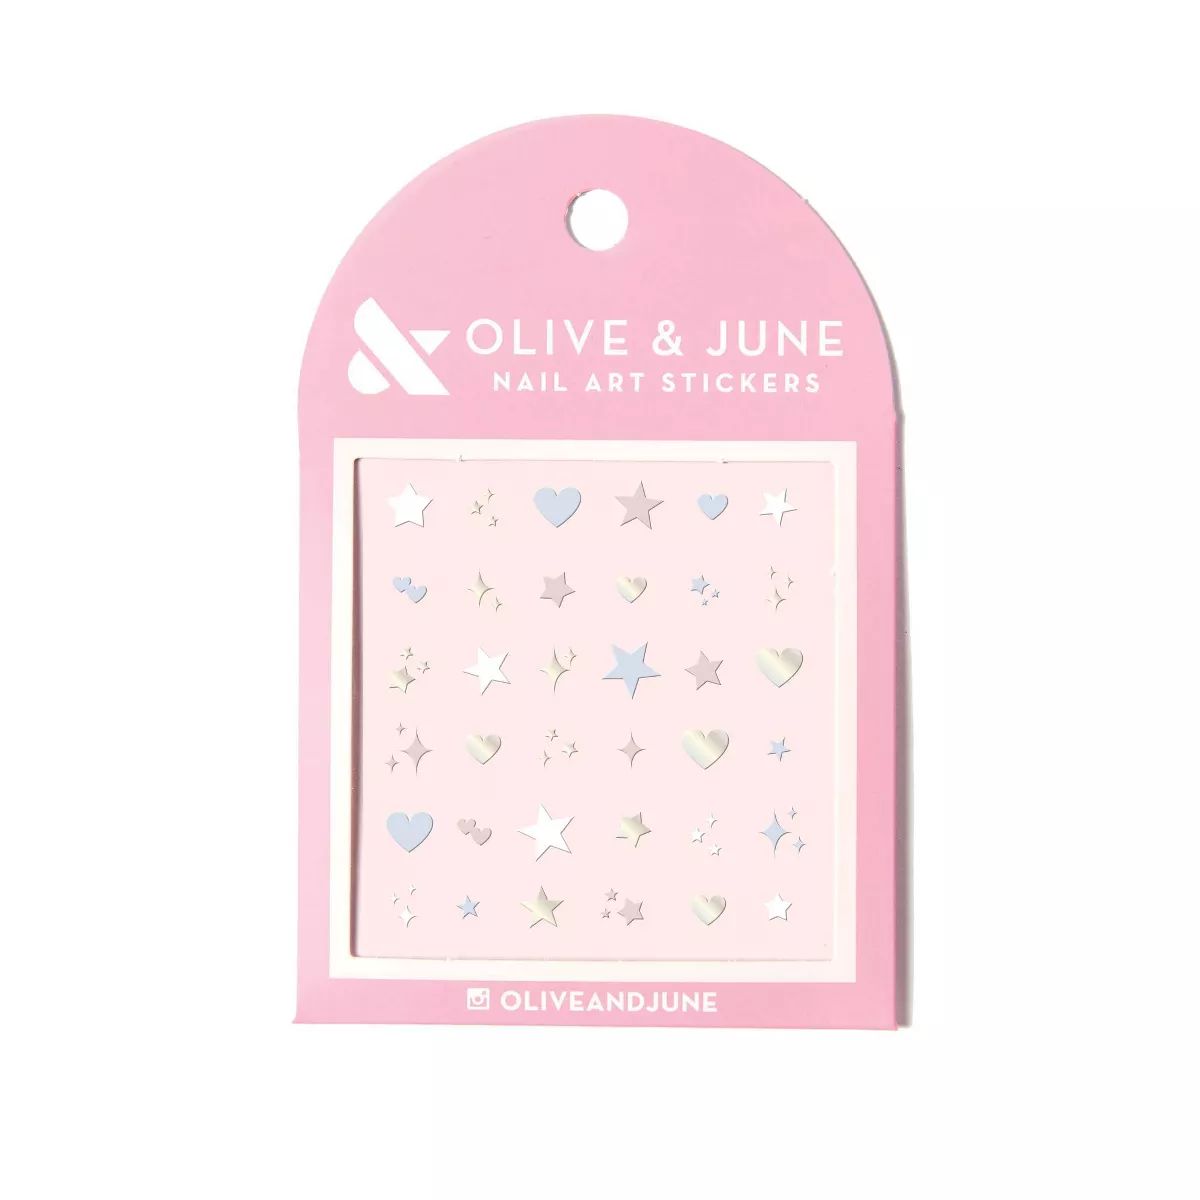 Olive & June Nail Art Stickers - Heart Star - 36ct | Target